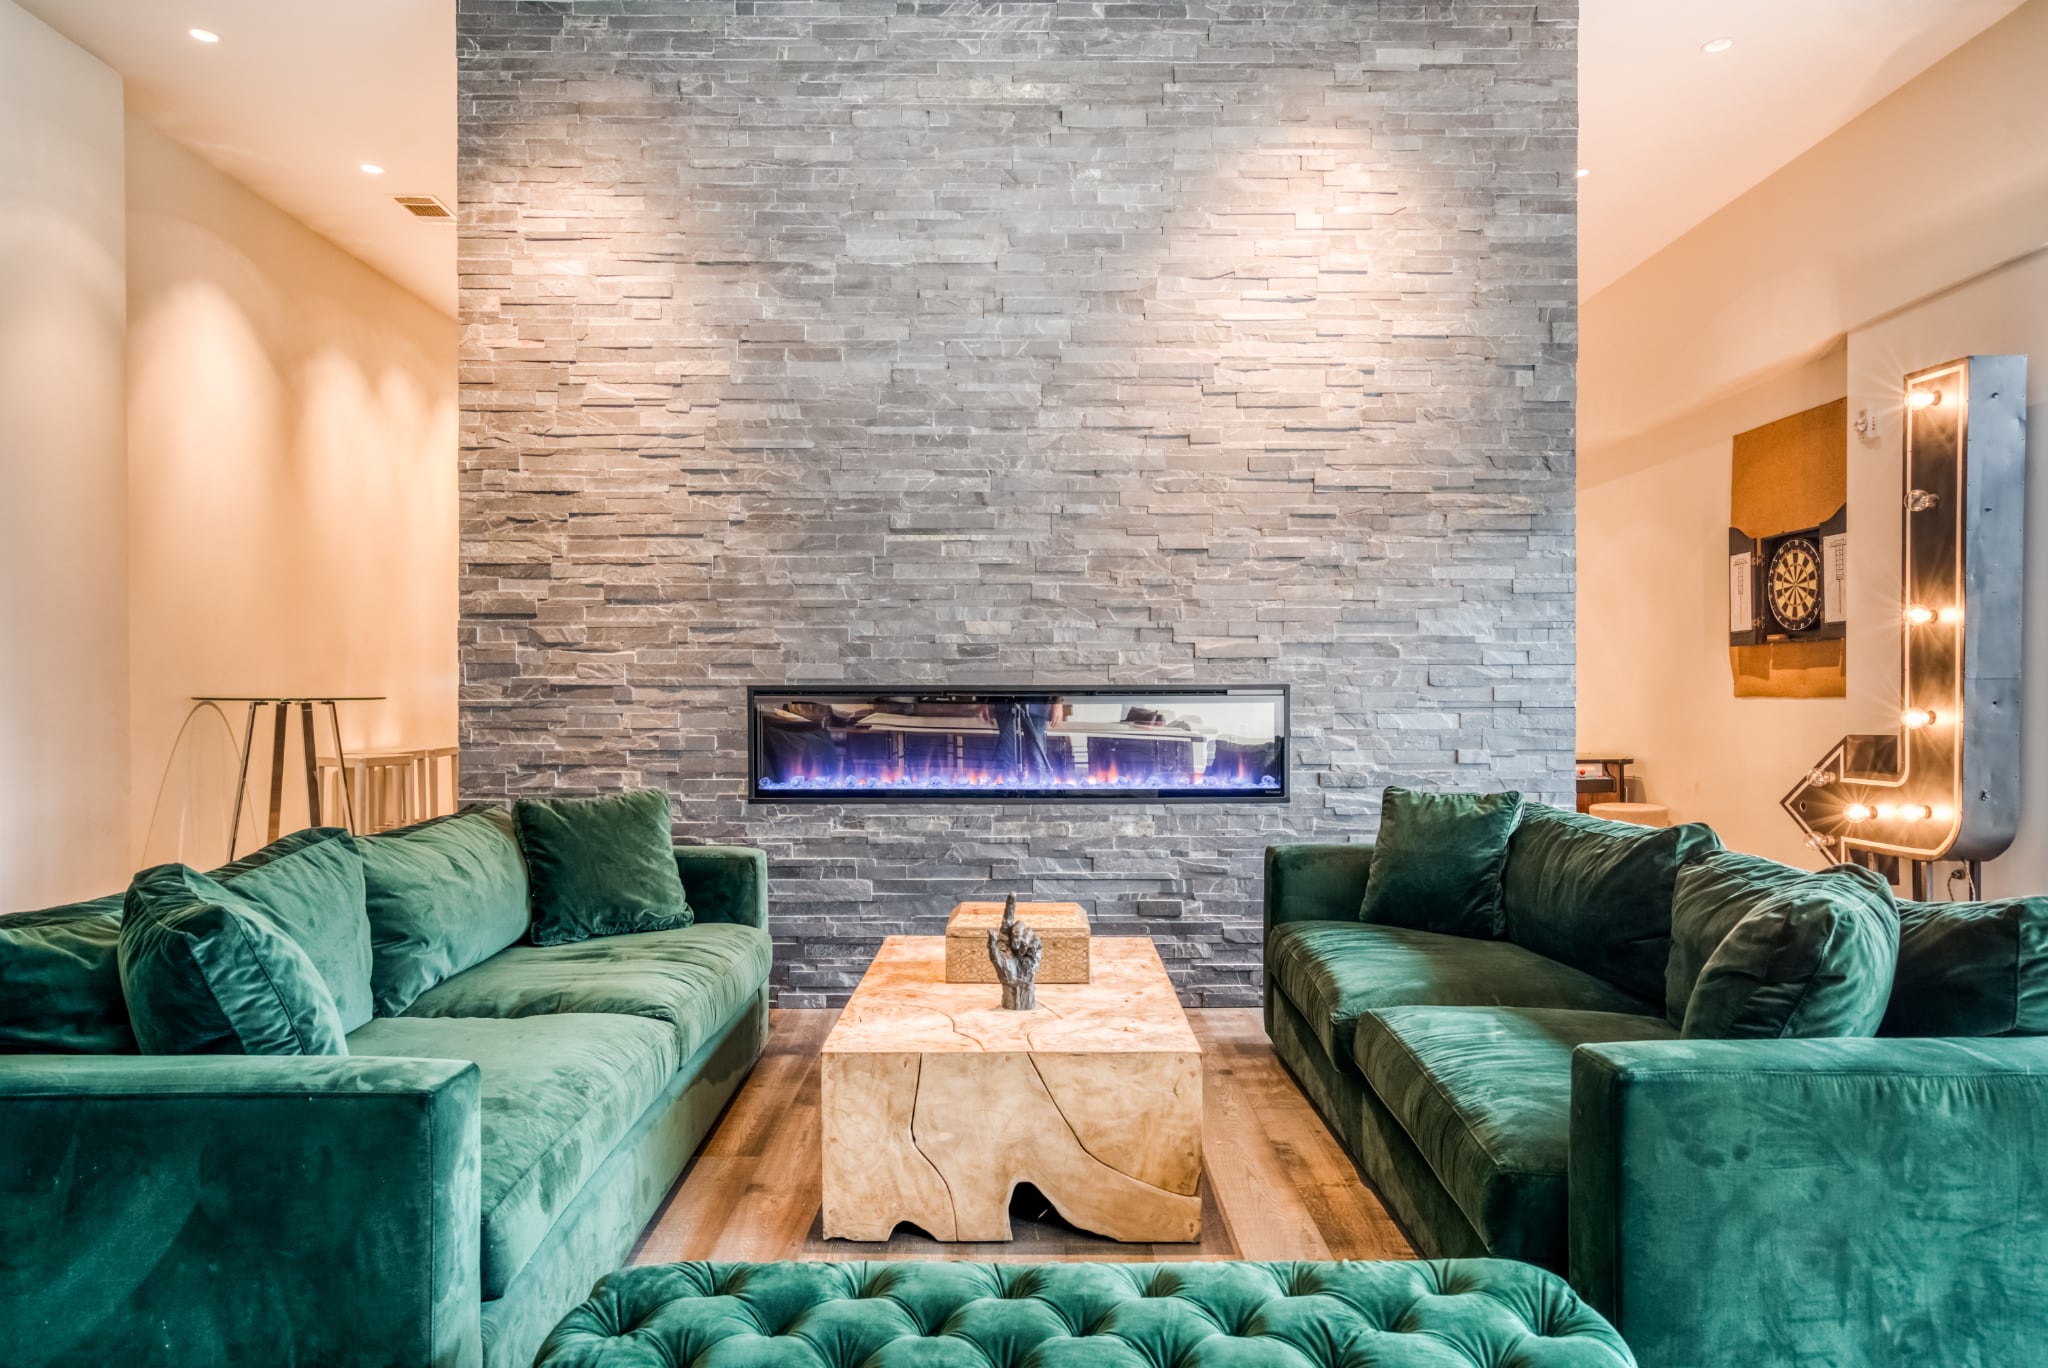 The residents' lounge at Mid Main Lofts with a fireplace and gorgeous emerald green sofas